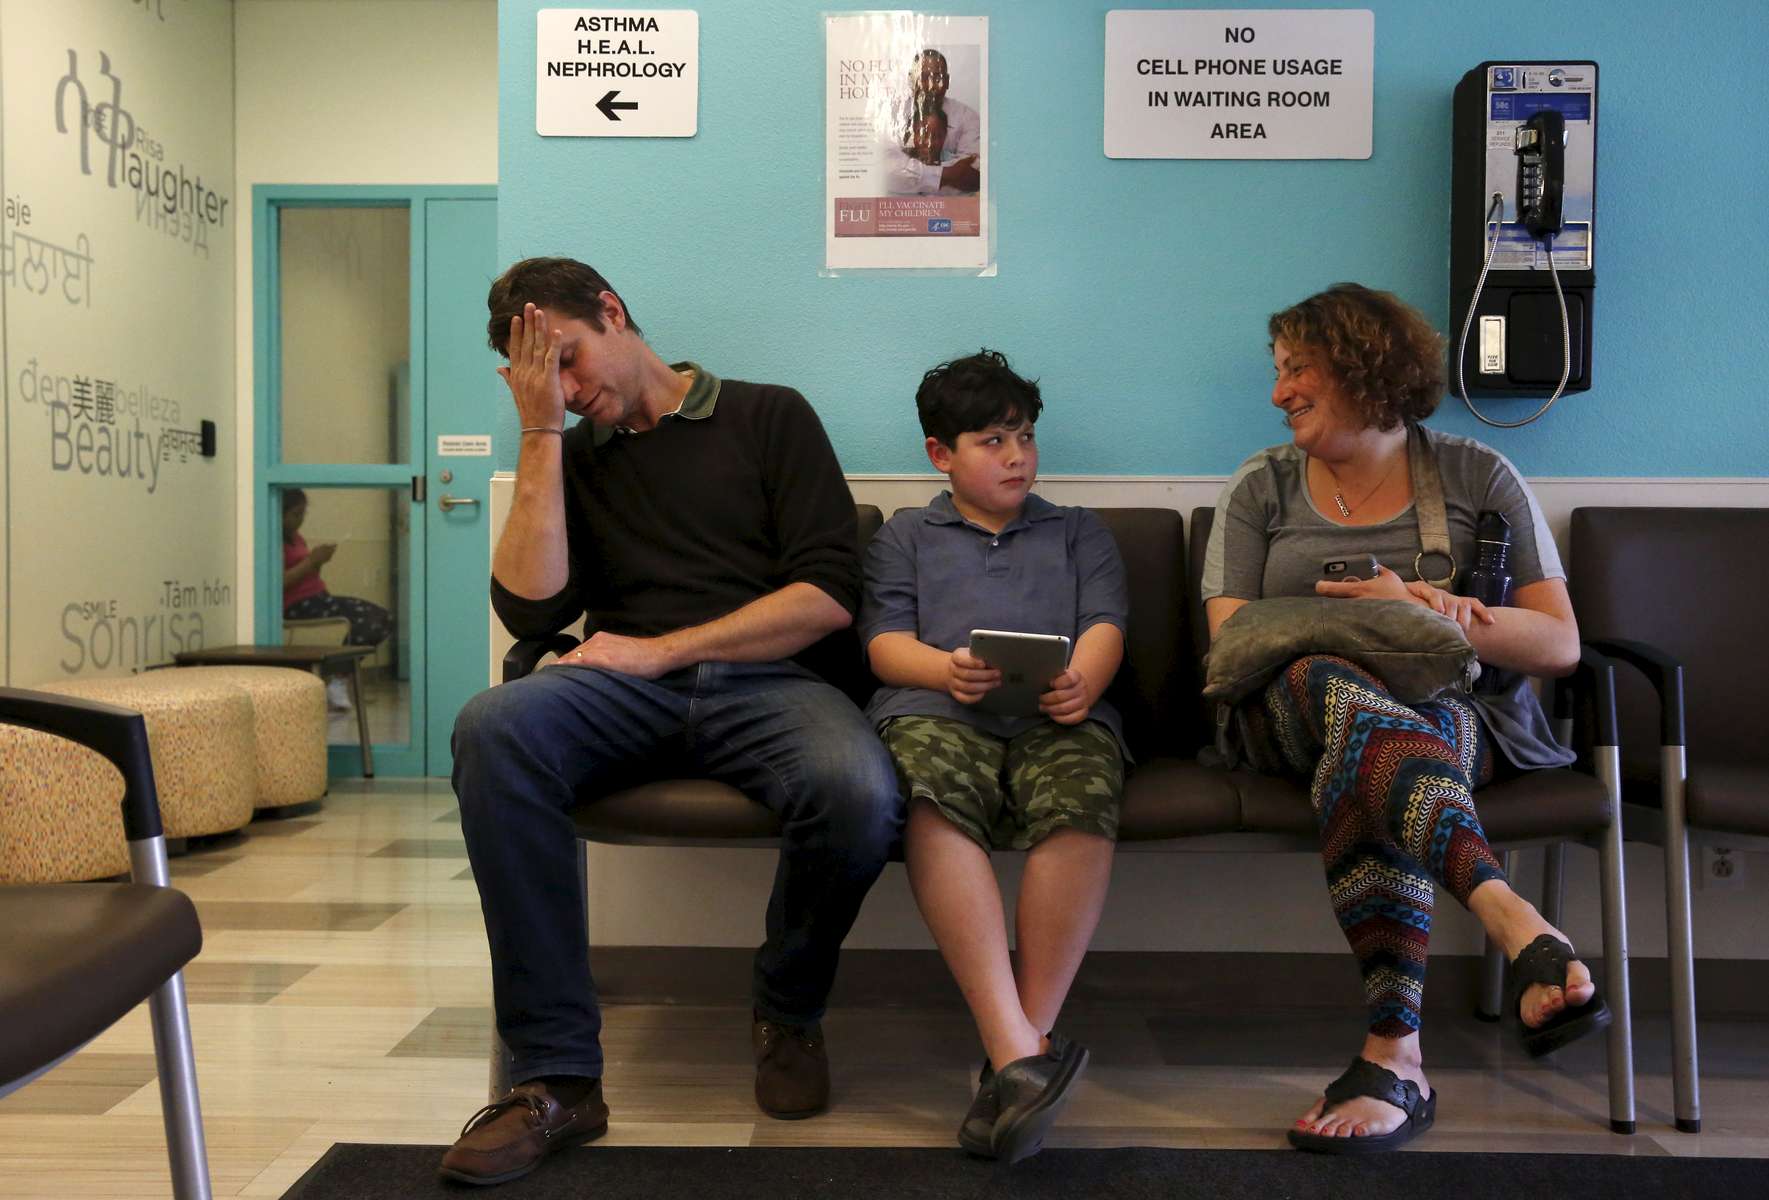 James Kaplan, 9, center, and his father Ben react to a puberty joke made by his mother Sara, right, as they wait for James' medical appointment  to determine if he is starting puberty March 15, 2017 at UCSF Benioff Children's Hospital's Child and Adolescent Gender Center Clinic in Oakland, Calif. James will be put on hormone blockers to stop the effects of puberty until he is a young teen. If he still insists on his current gender identity, he will then be put on cross-hormone therapy which will allow him to experience development that aligns with his gender identity. 